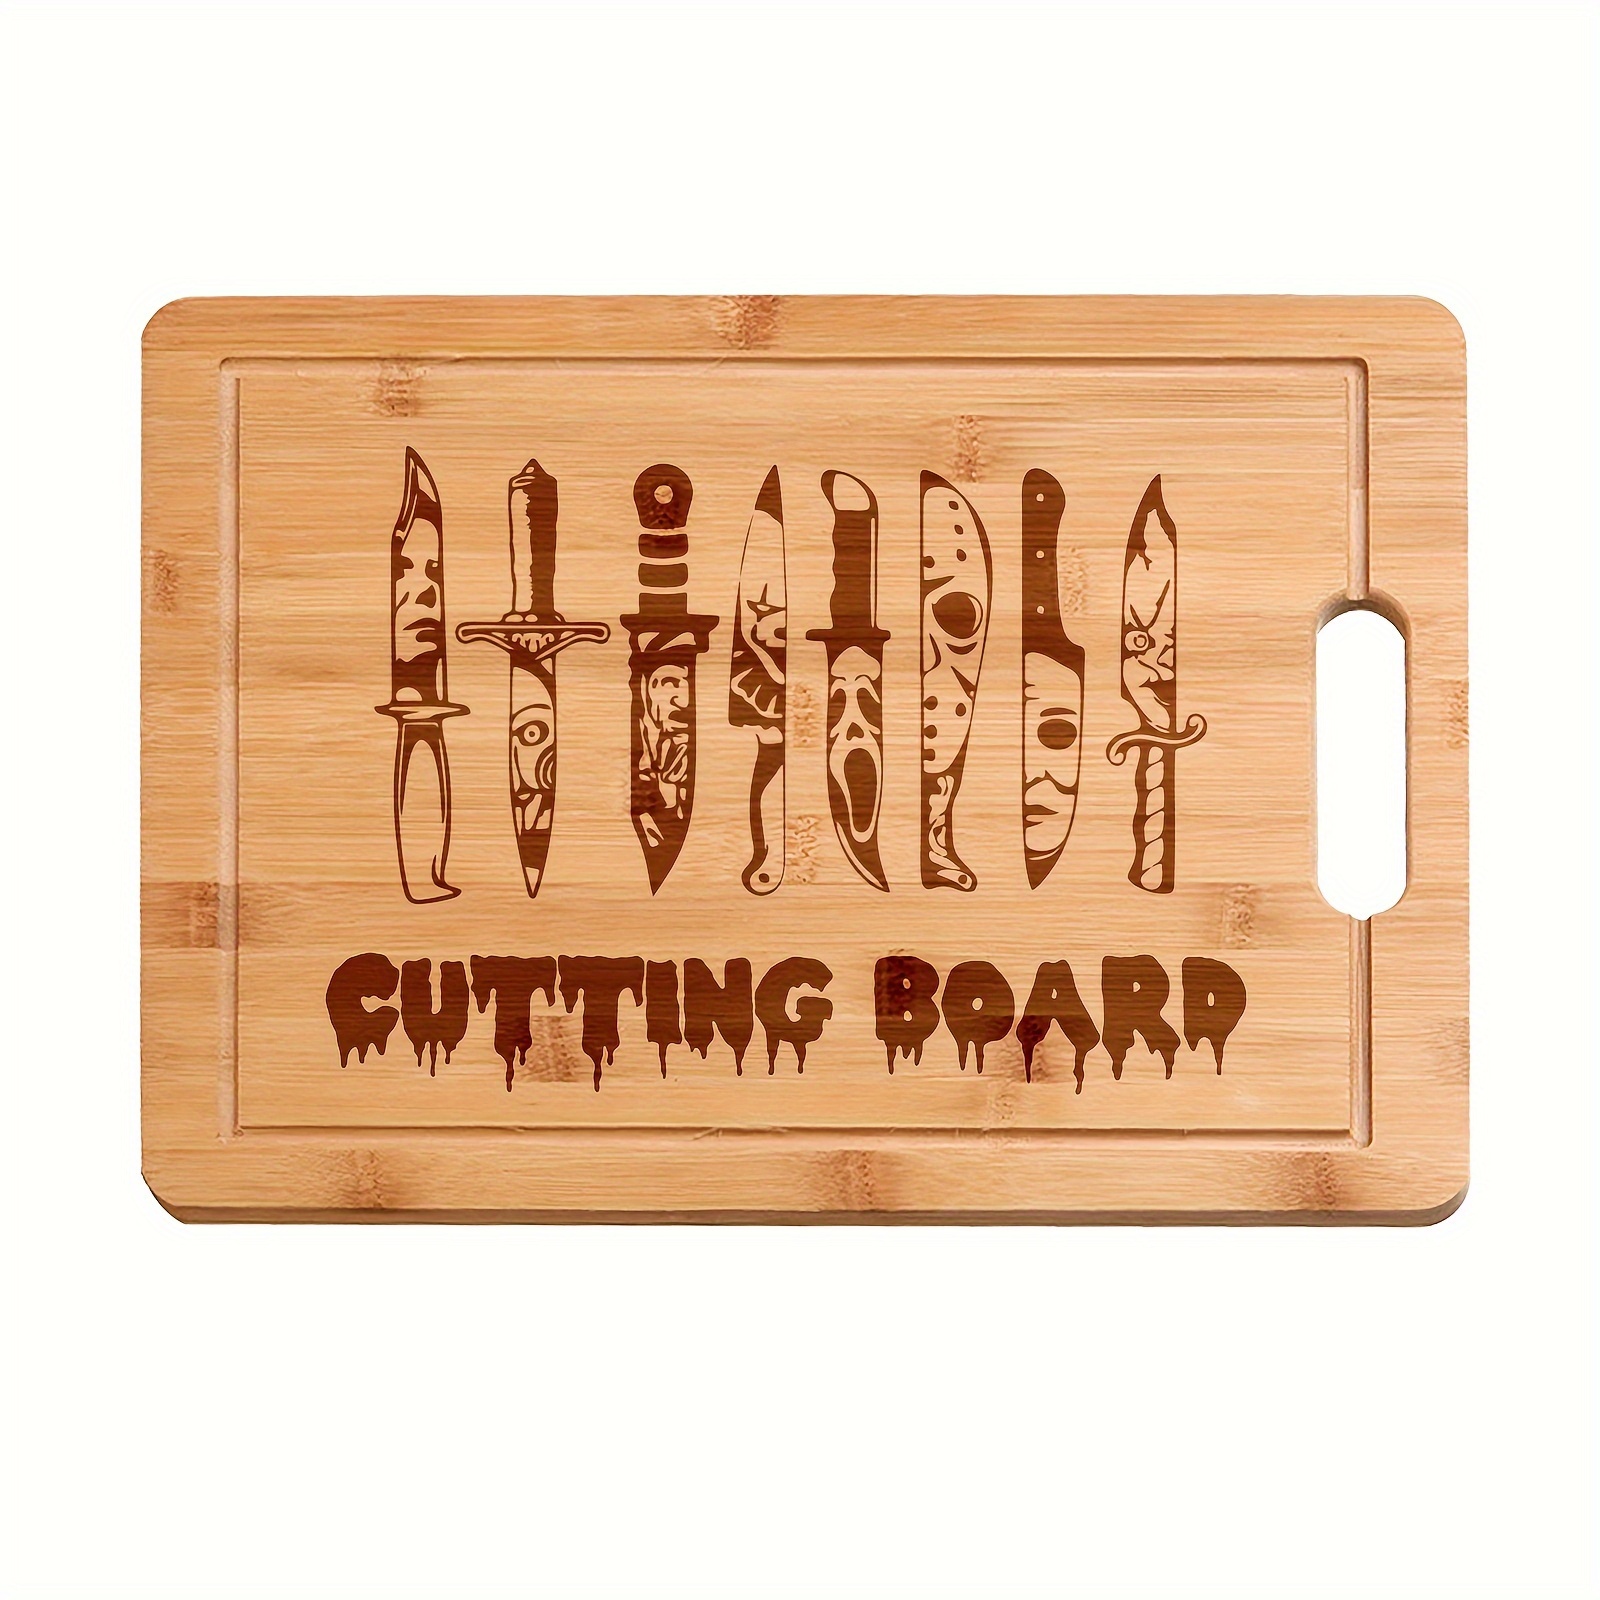 Action Movie Cutting Board Set of Three, Engraved Bamboo Cutting